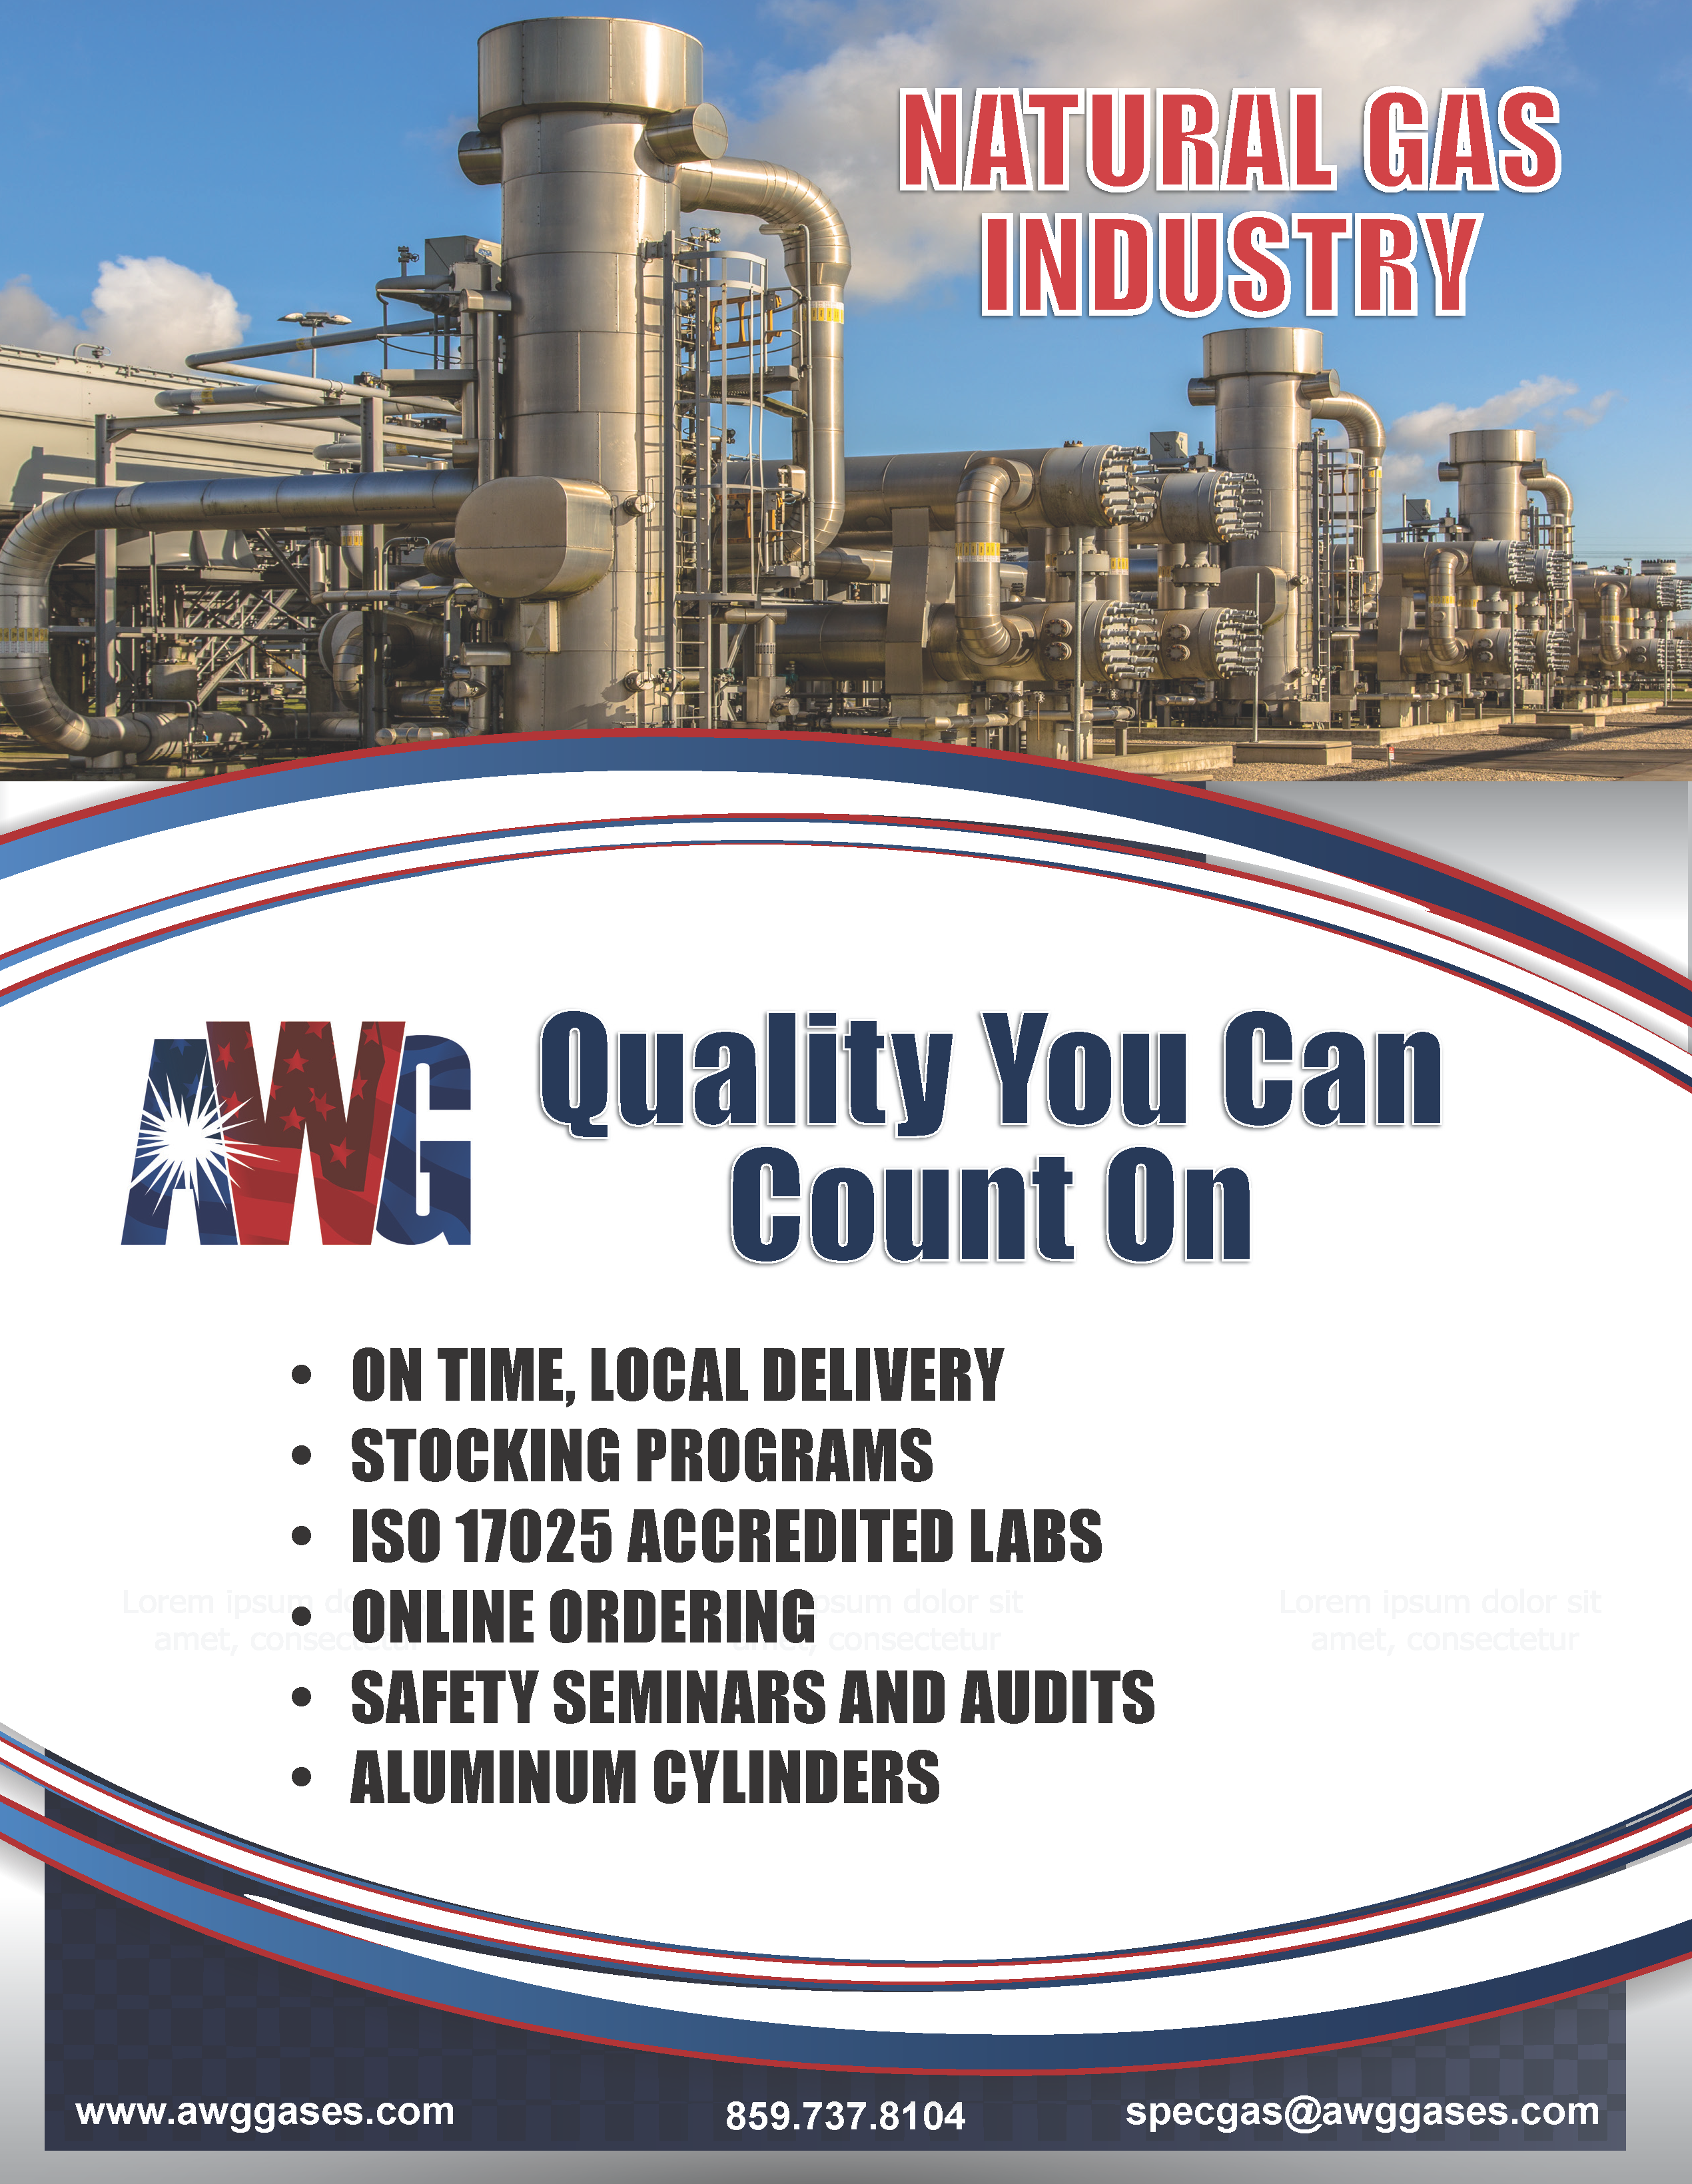 AWG Natural Gas Brochure